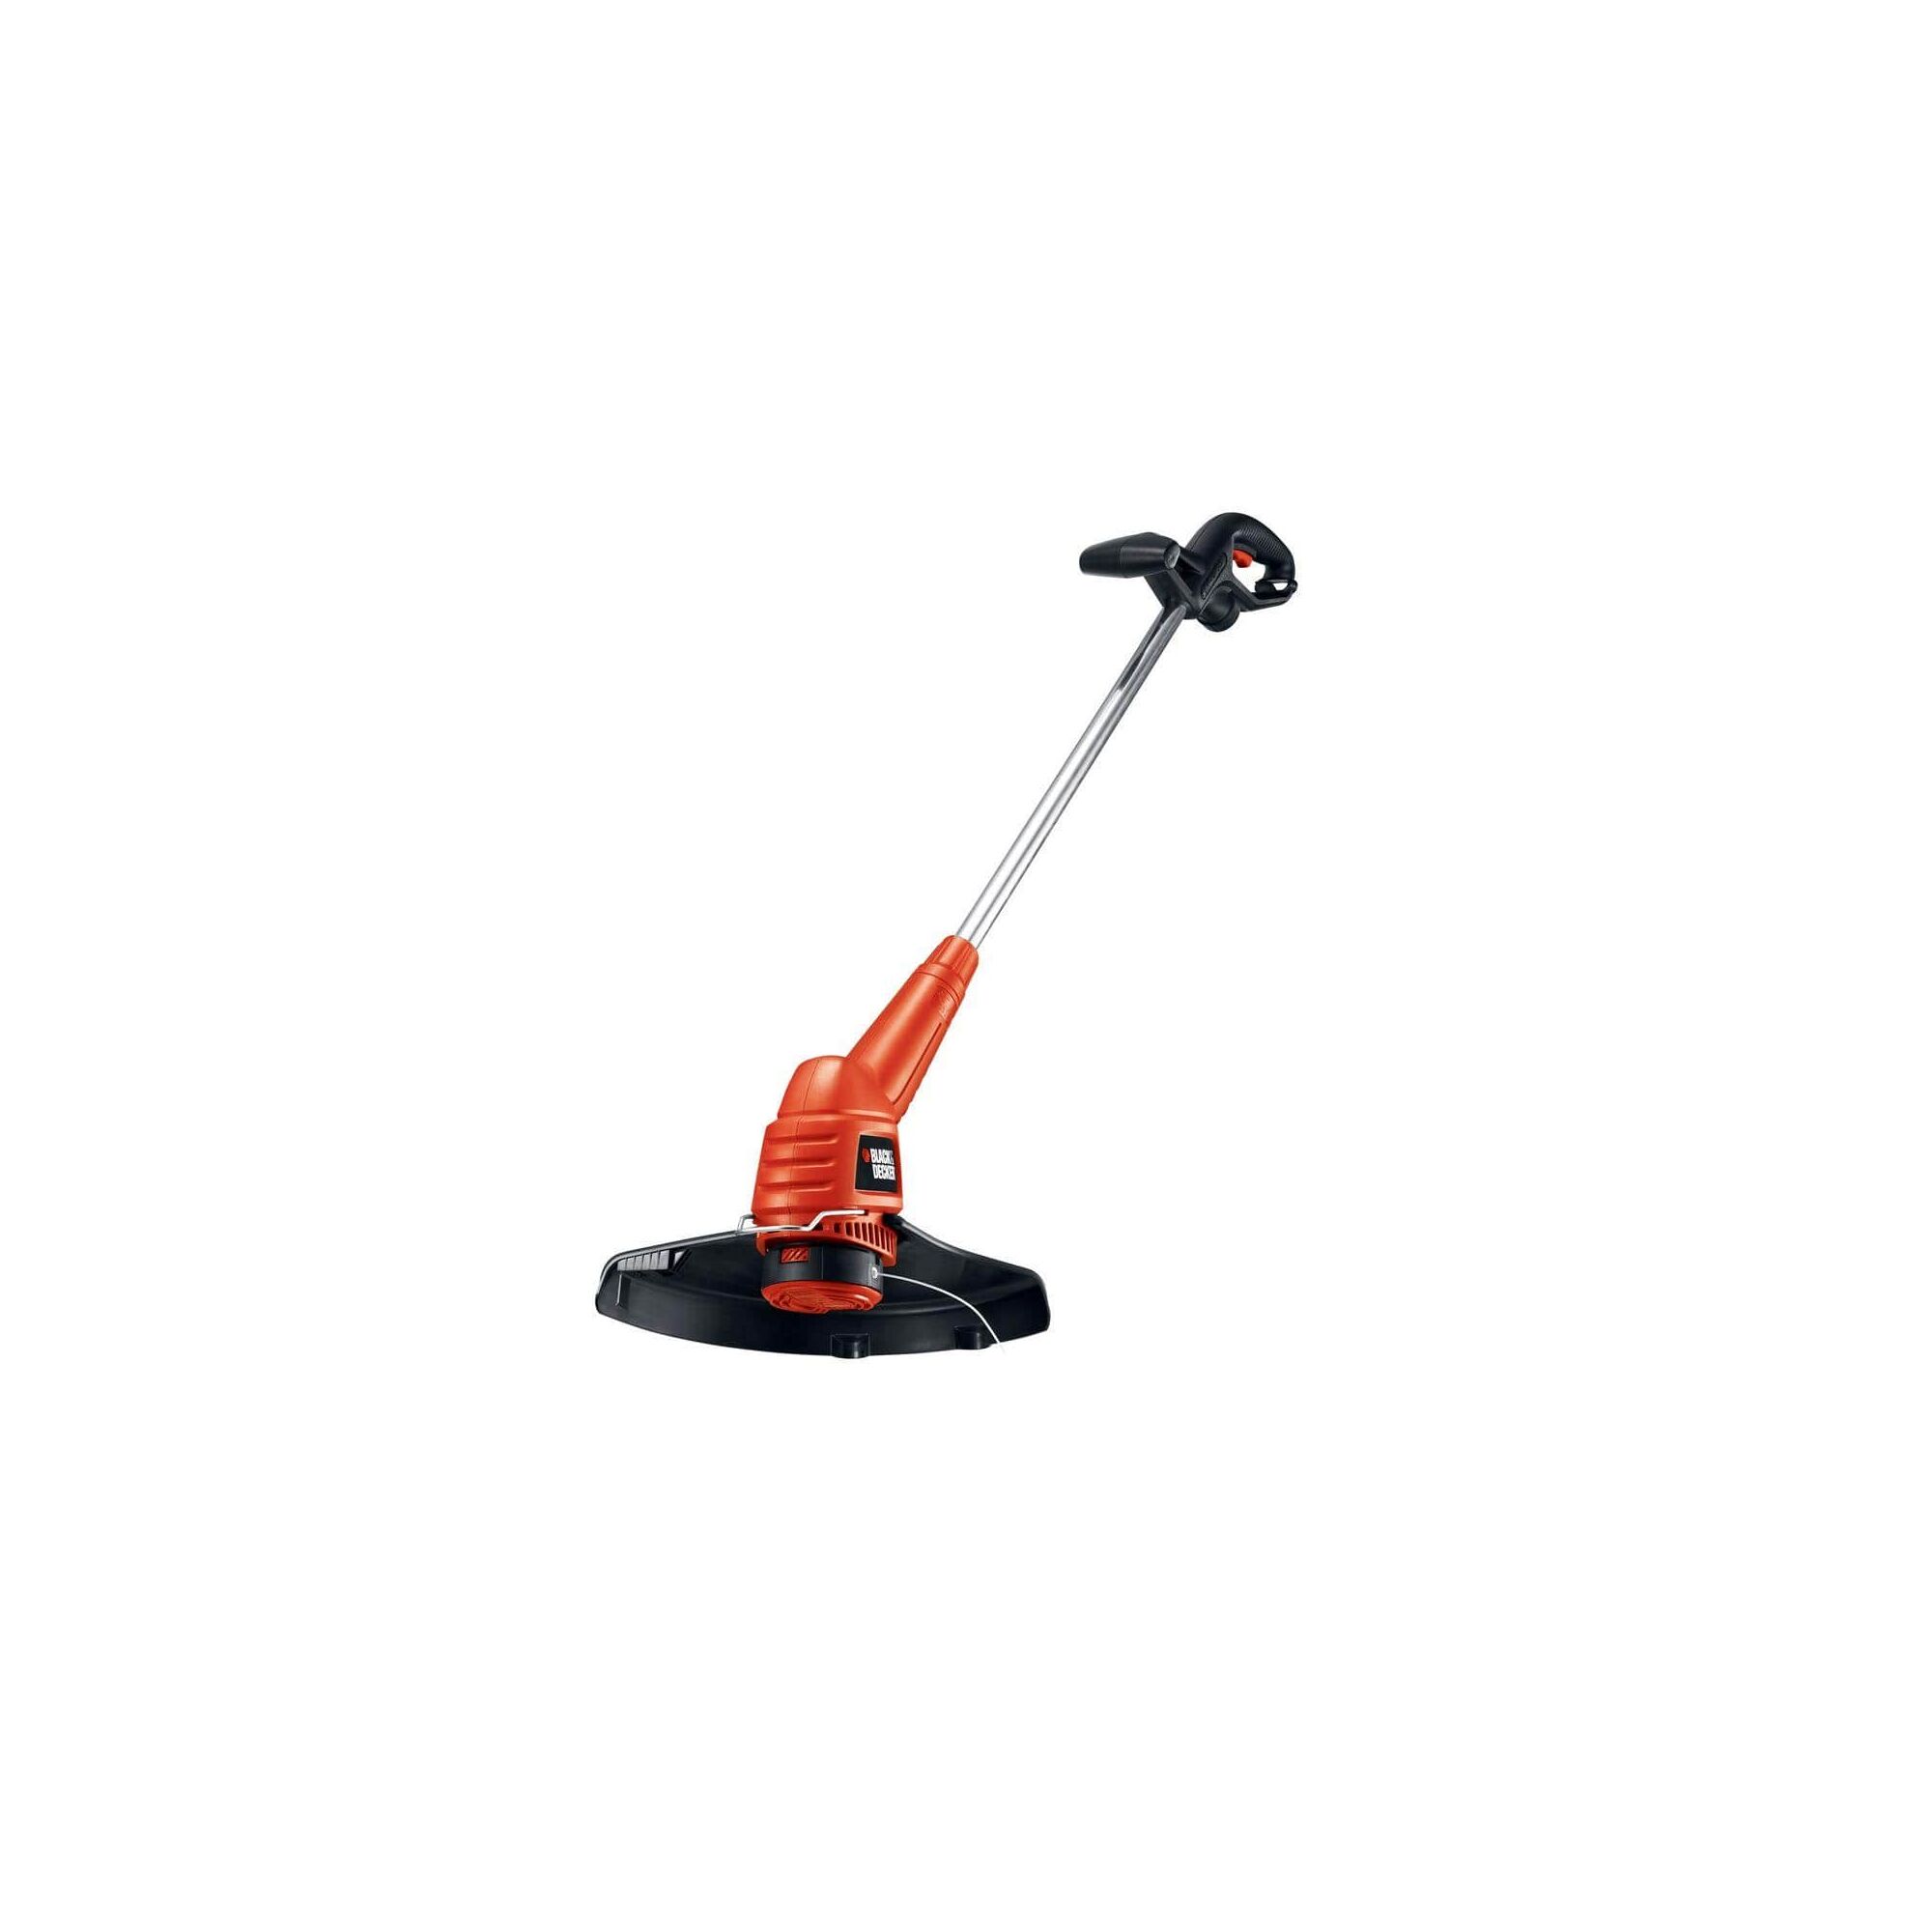 2-in-1 Electric Trimmer/Edger on white background.